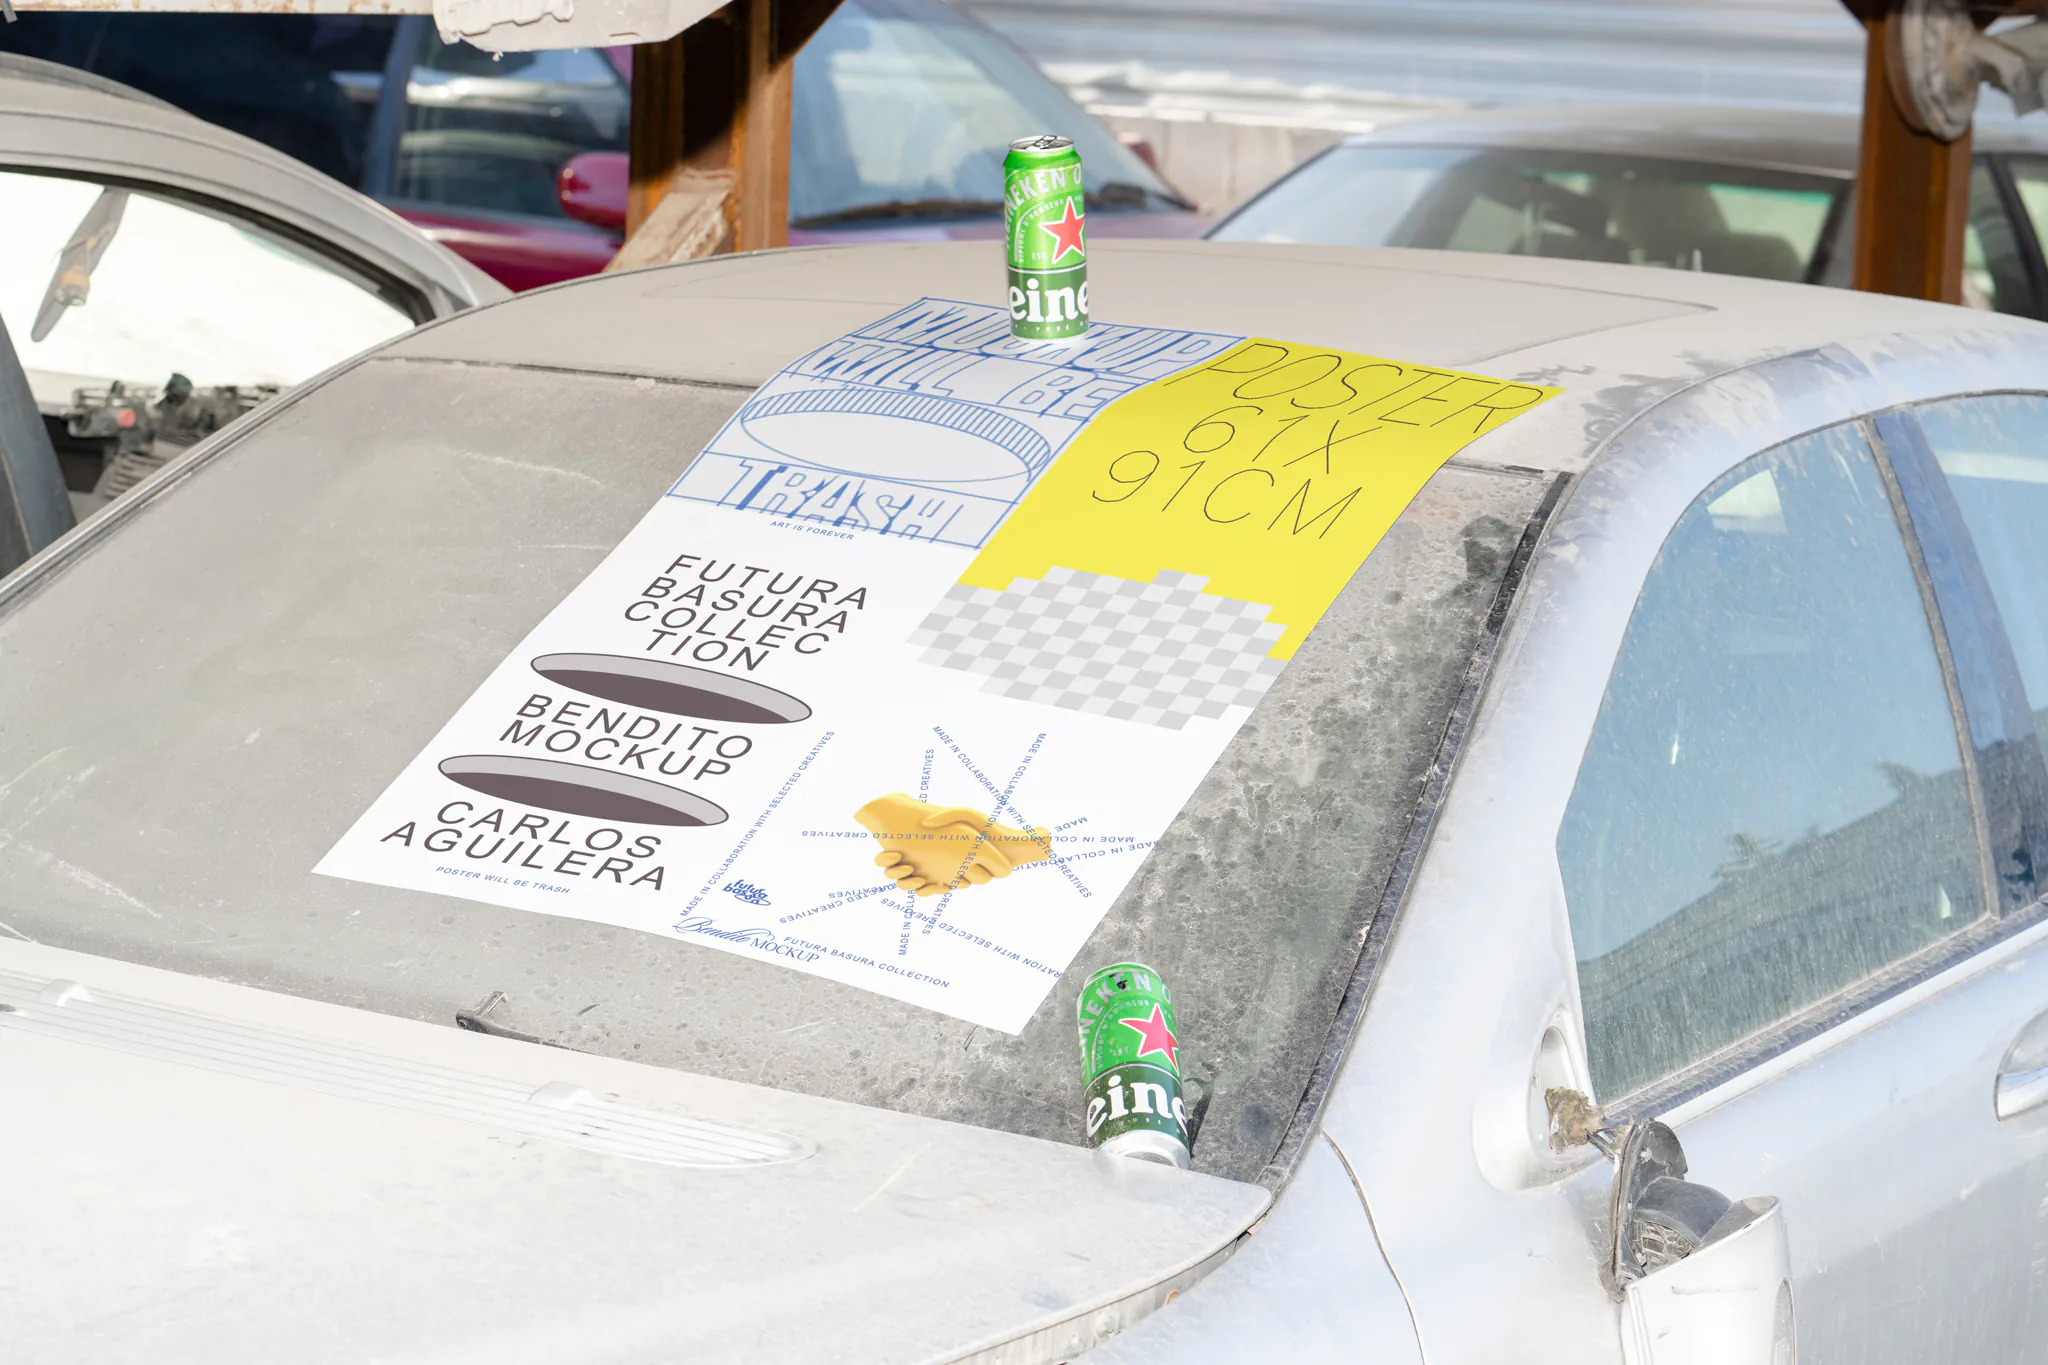 Poster mockup on top of a dirty and dusty car